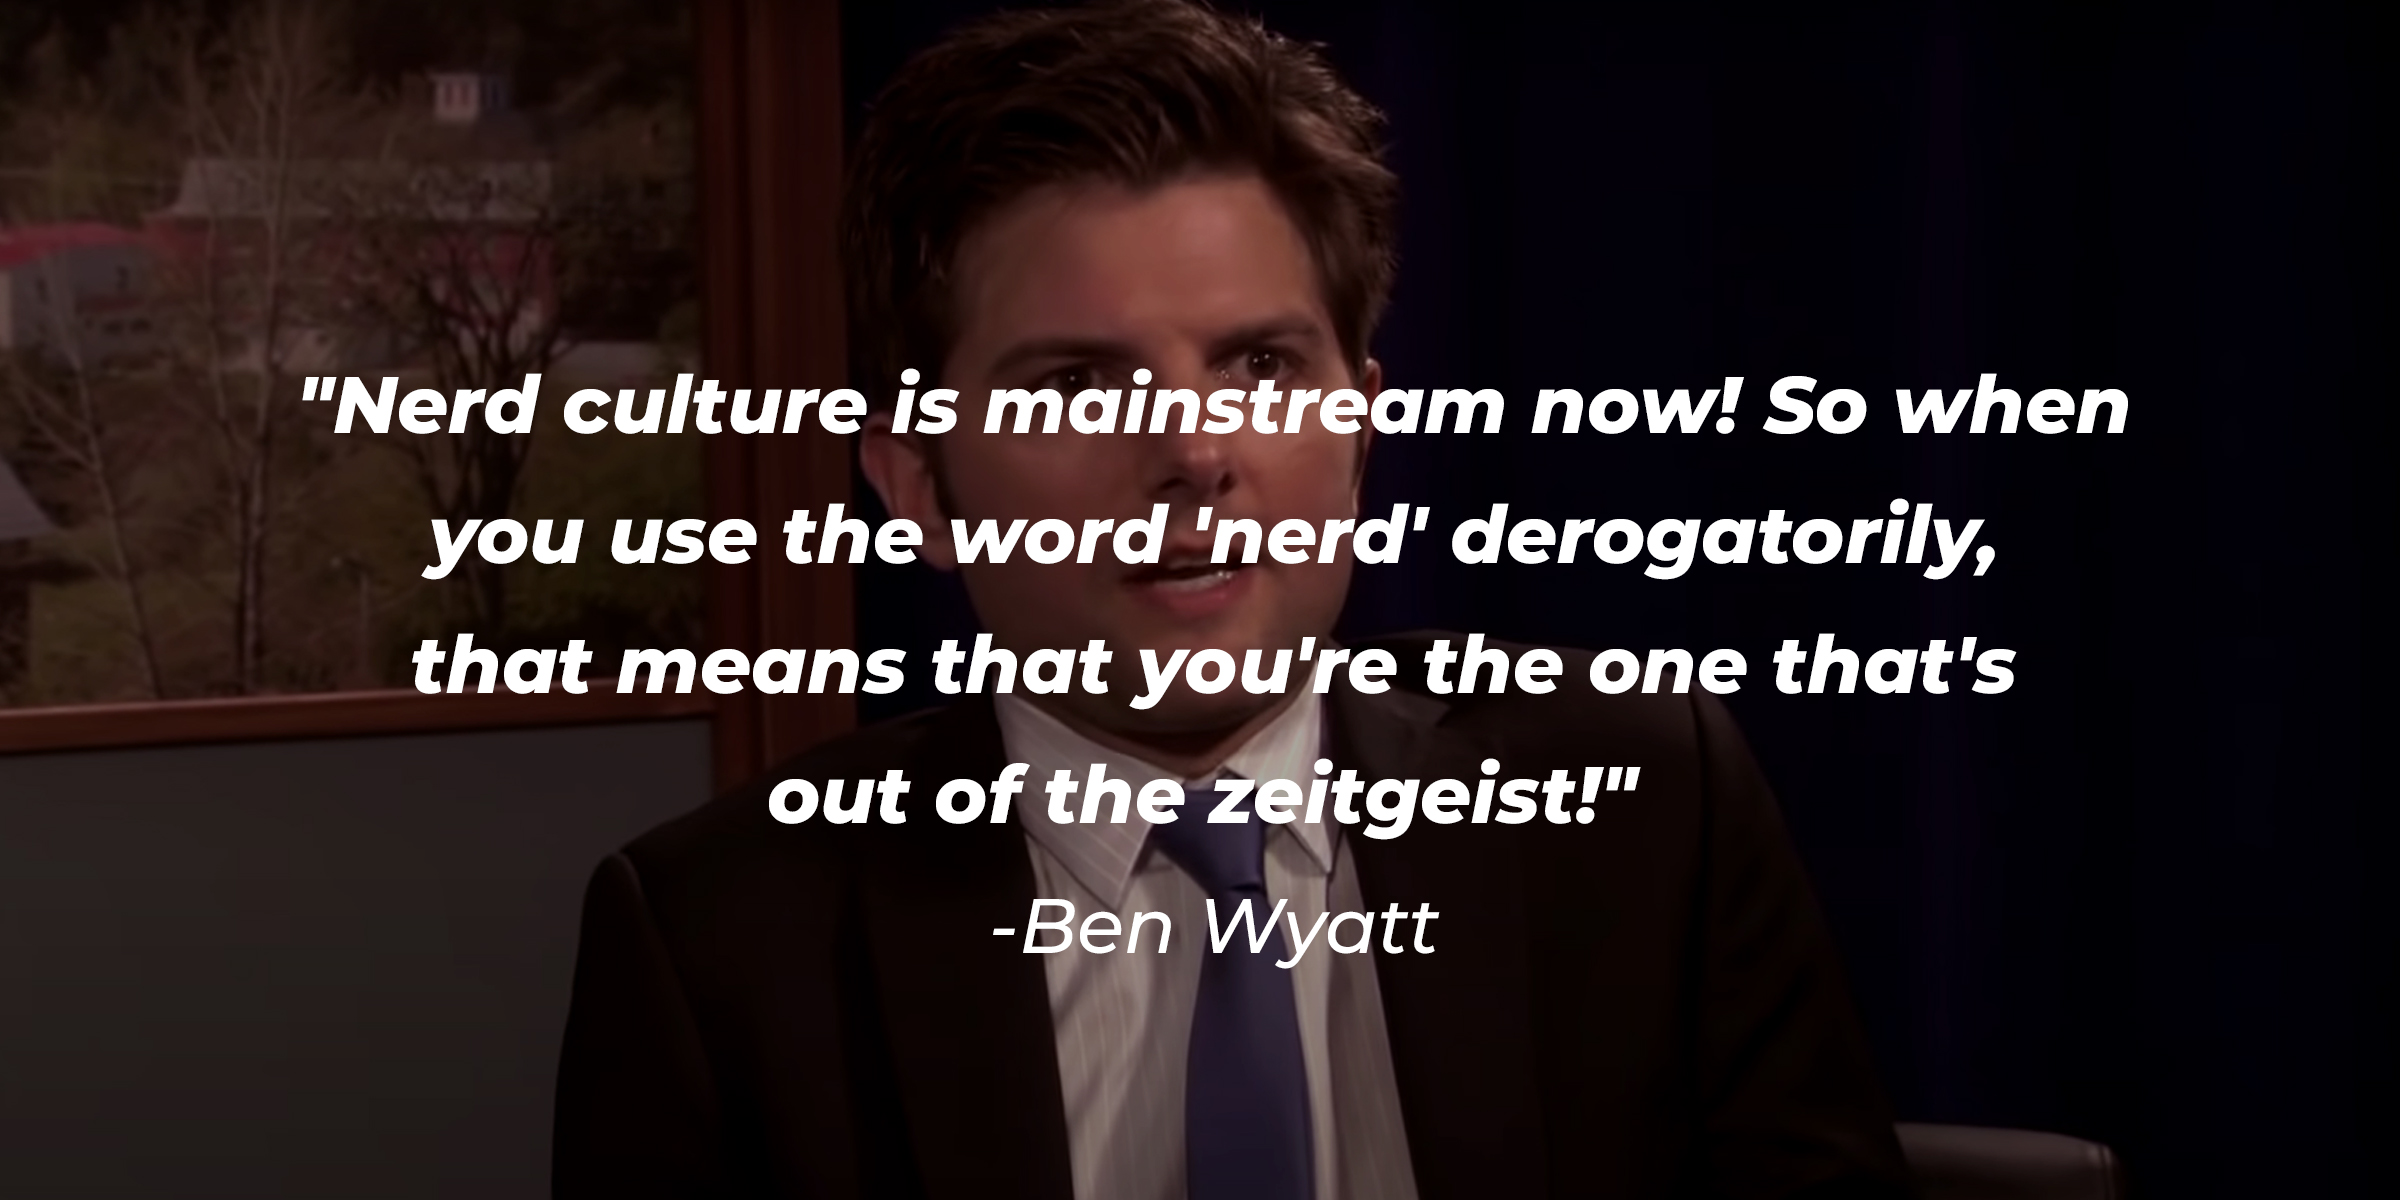 A photo of Ben Wyatt with his quote, "Nerd culture is mainstream now! So when you use the word 'nerd' derogatorily, that means that you're the one that's out of the zeitgeist!" | Source: youtube.com/ParksandRecreation